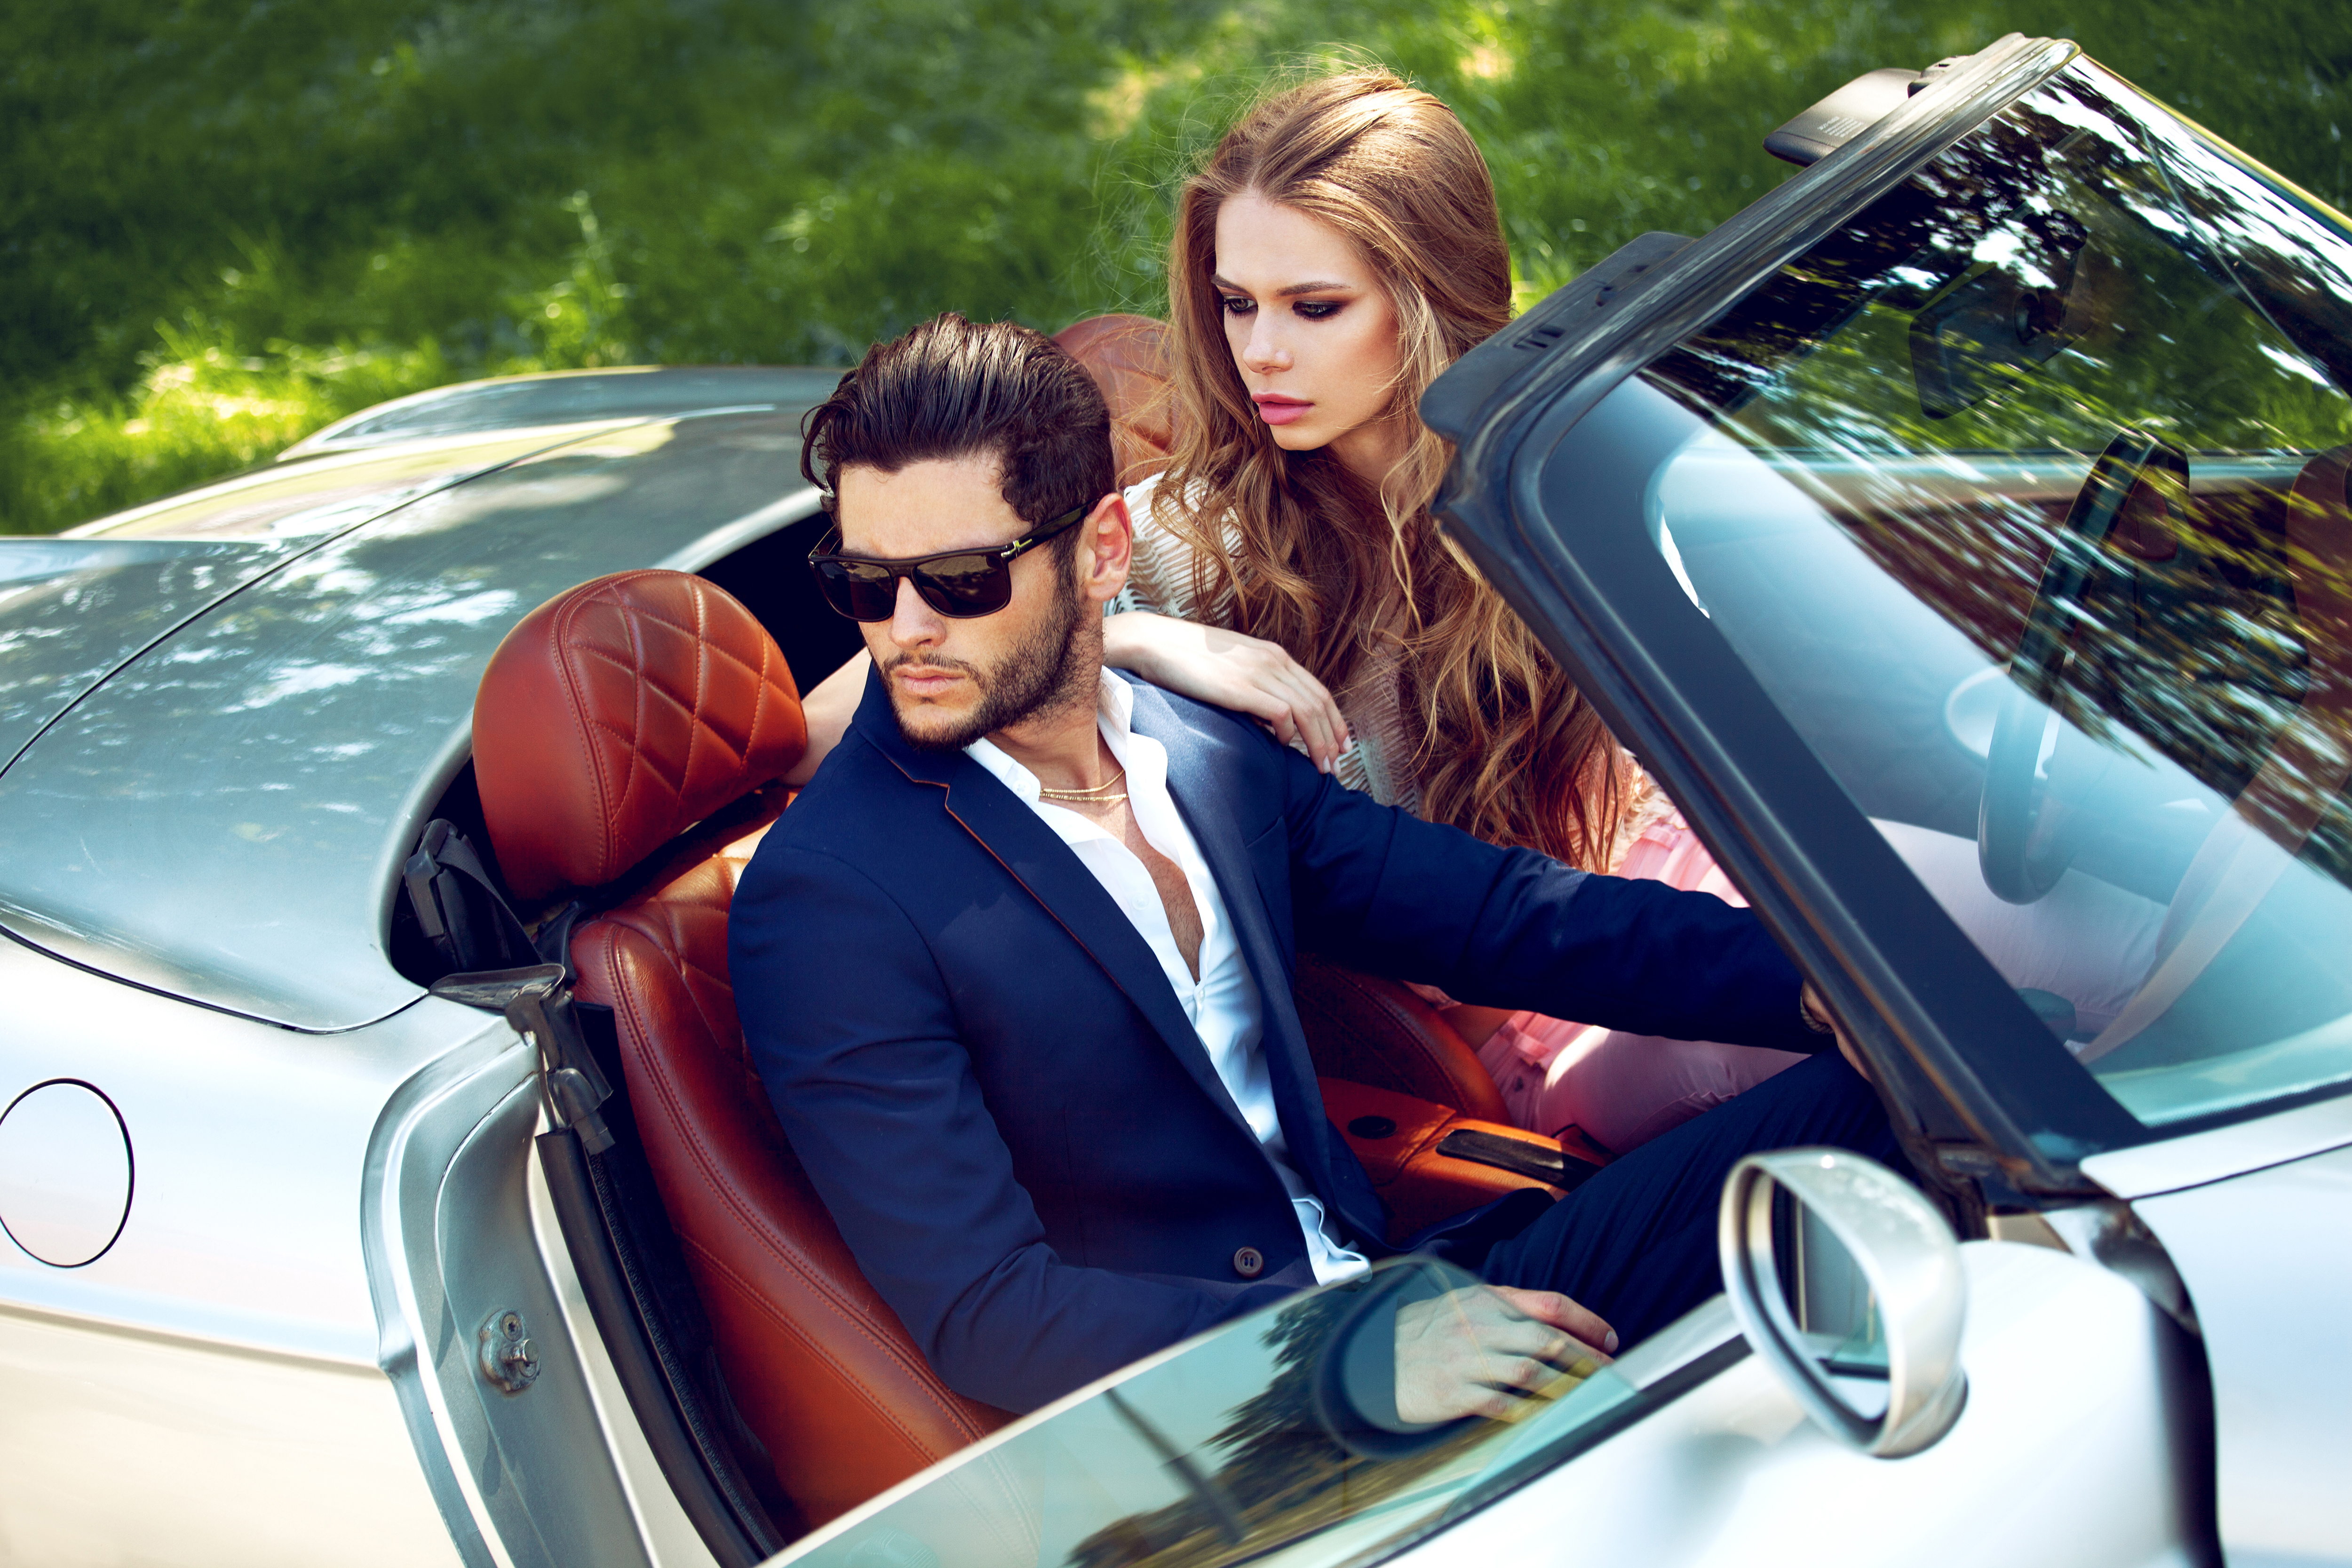 A young couple in a luxurious car | Source: Shutterstock